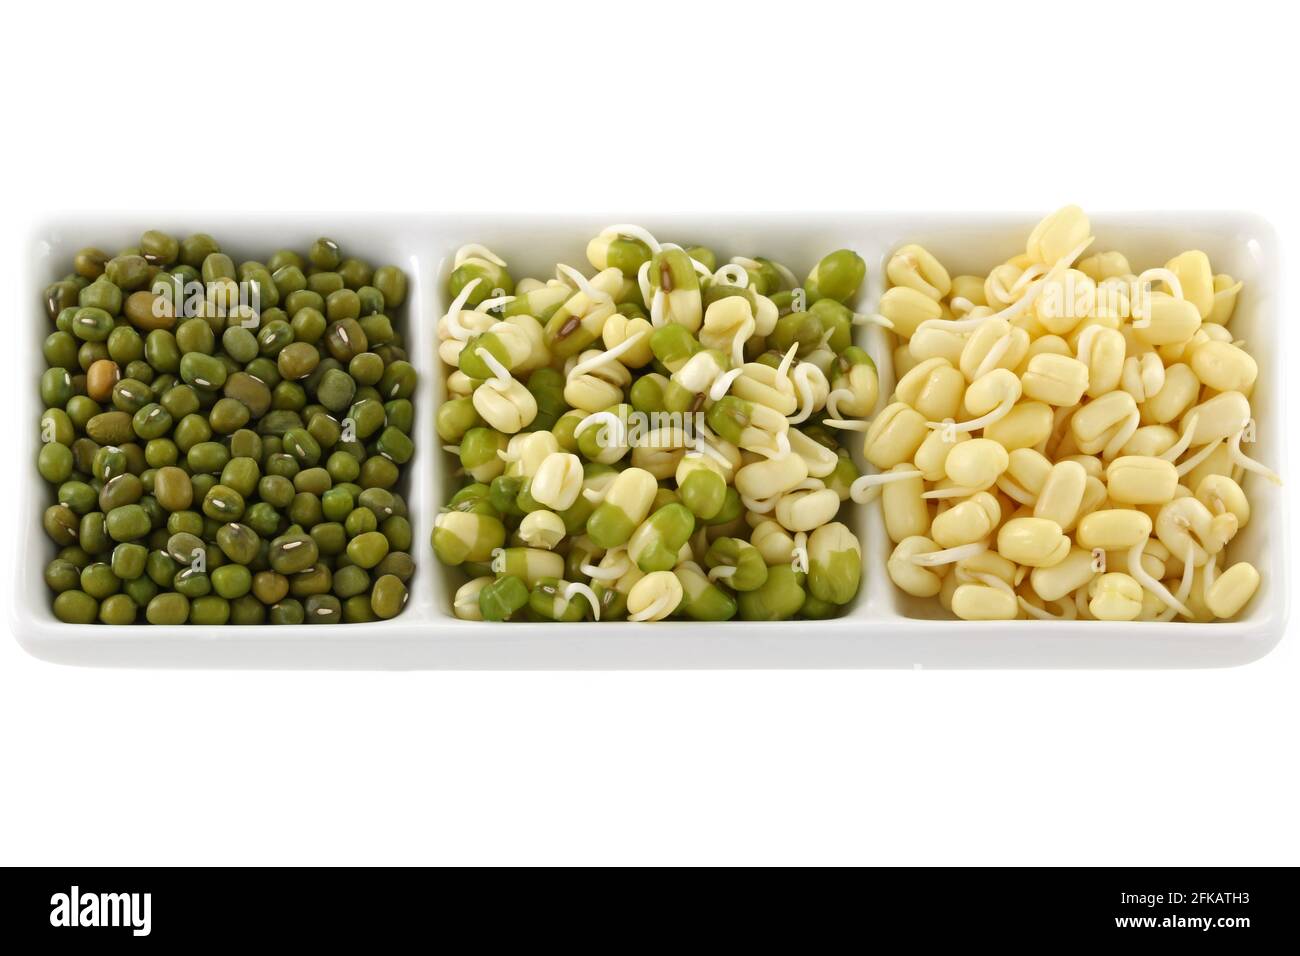 Dried and soaked Mung Bean Green gram sprouts with and without green skins Stock Photo